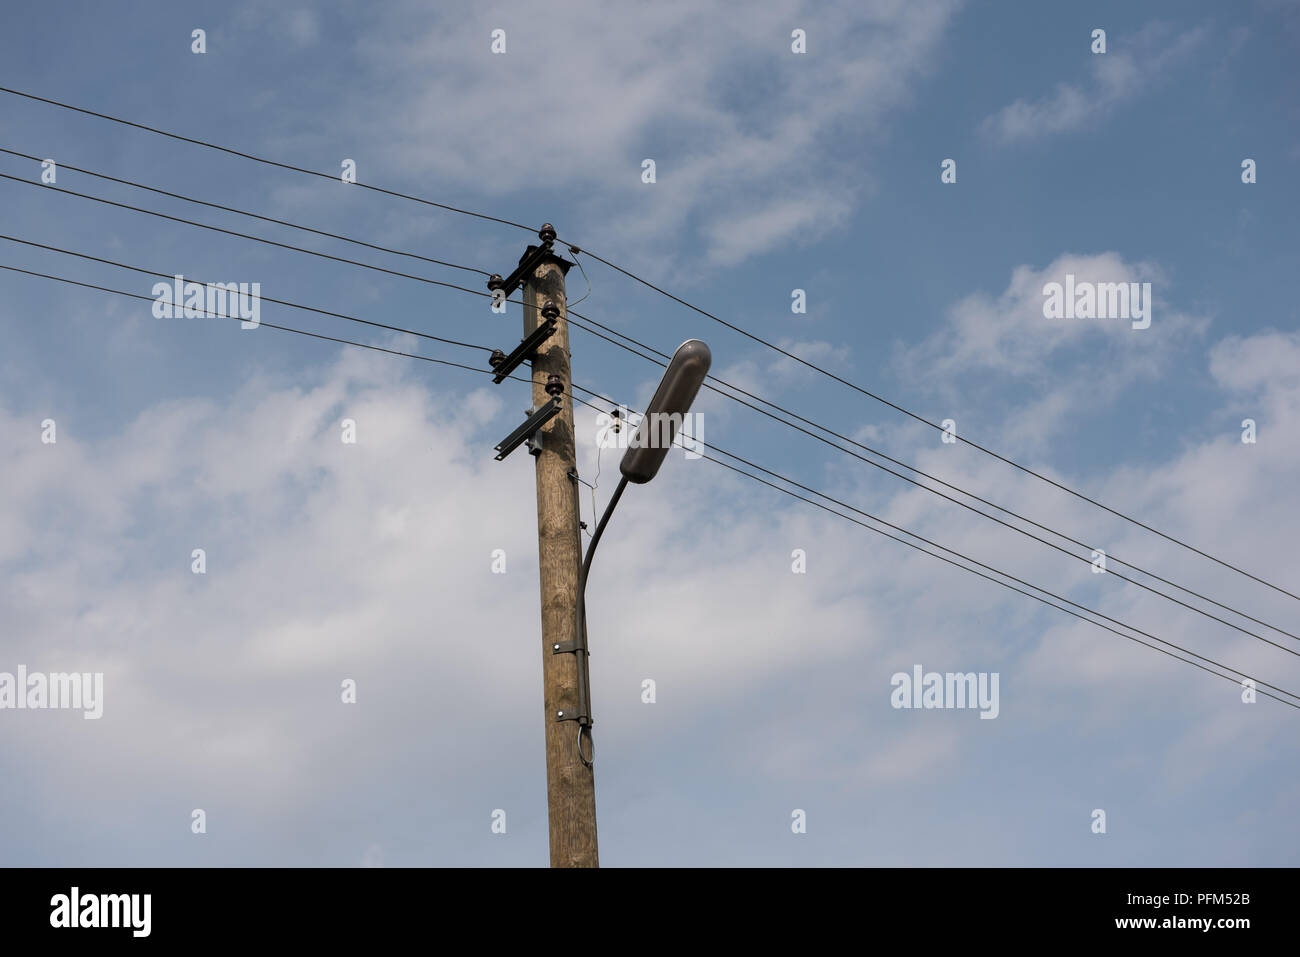 Wooden street lamp post with electric wires against blue sky with white clouds Stock Photo